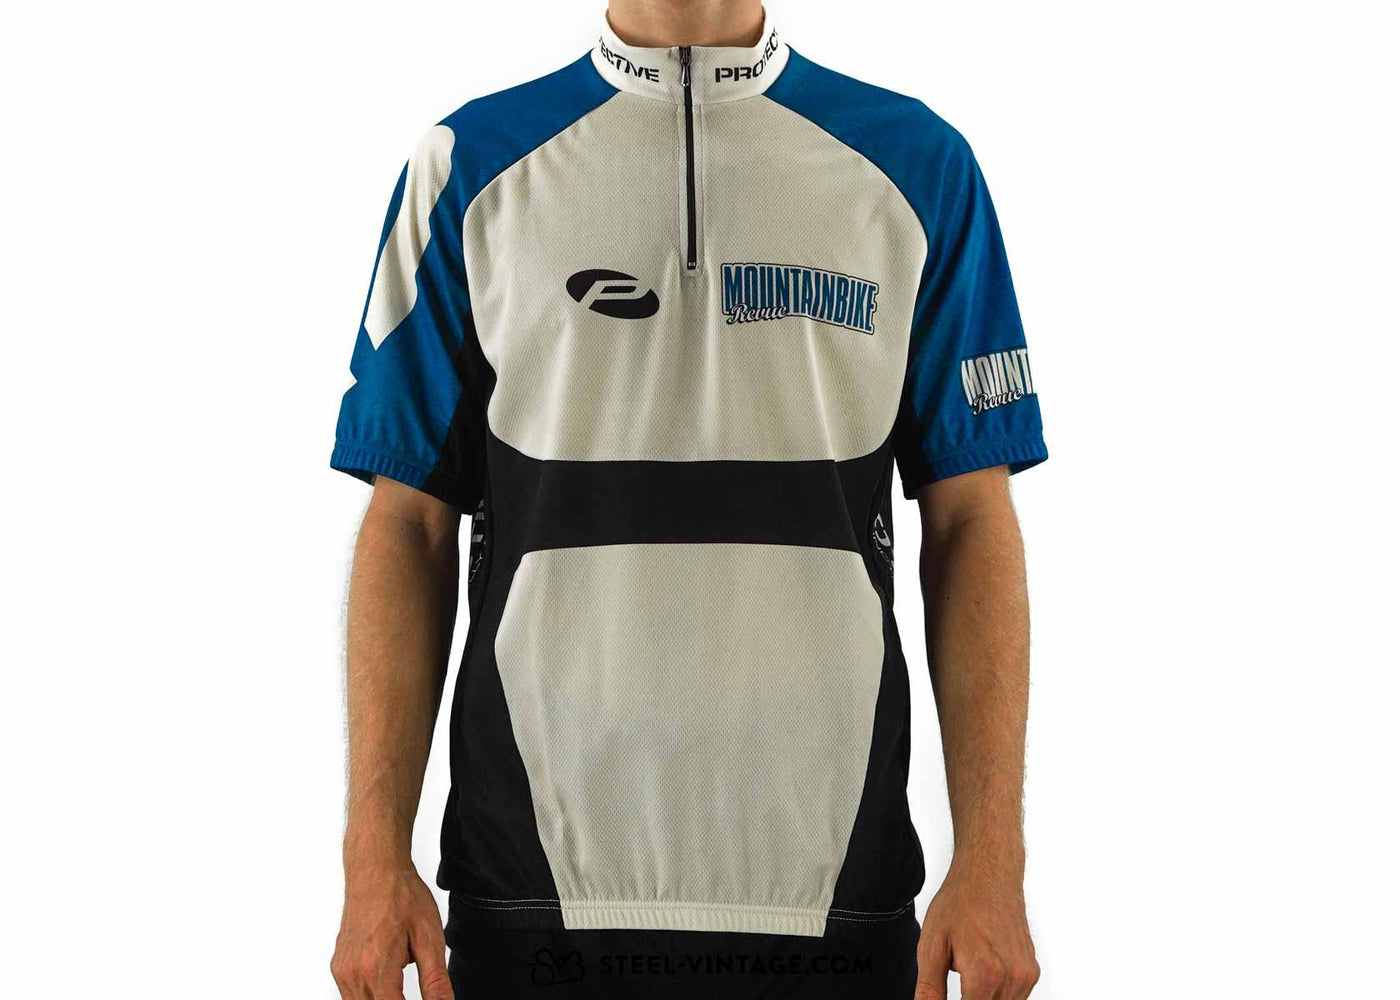 Protective Mountainbike Cycling Jersey | Steel Vintage Bikes